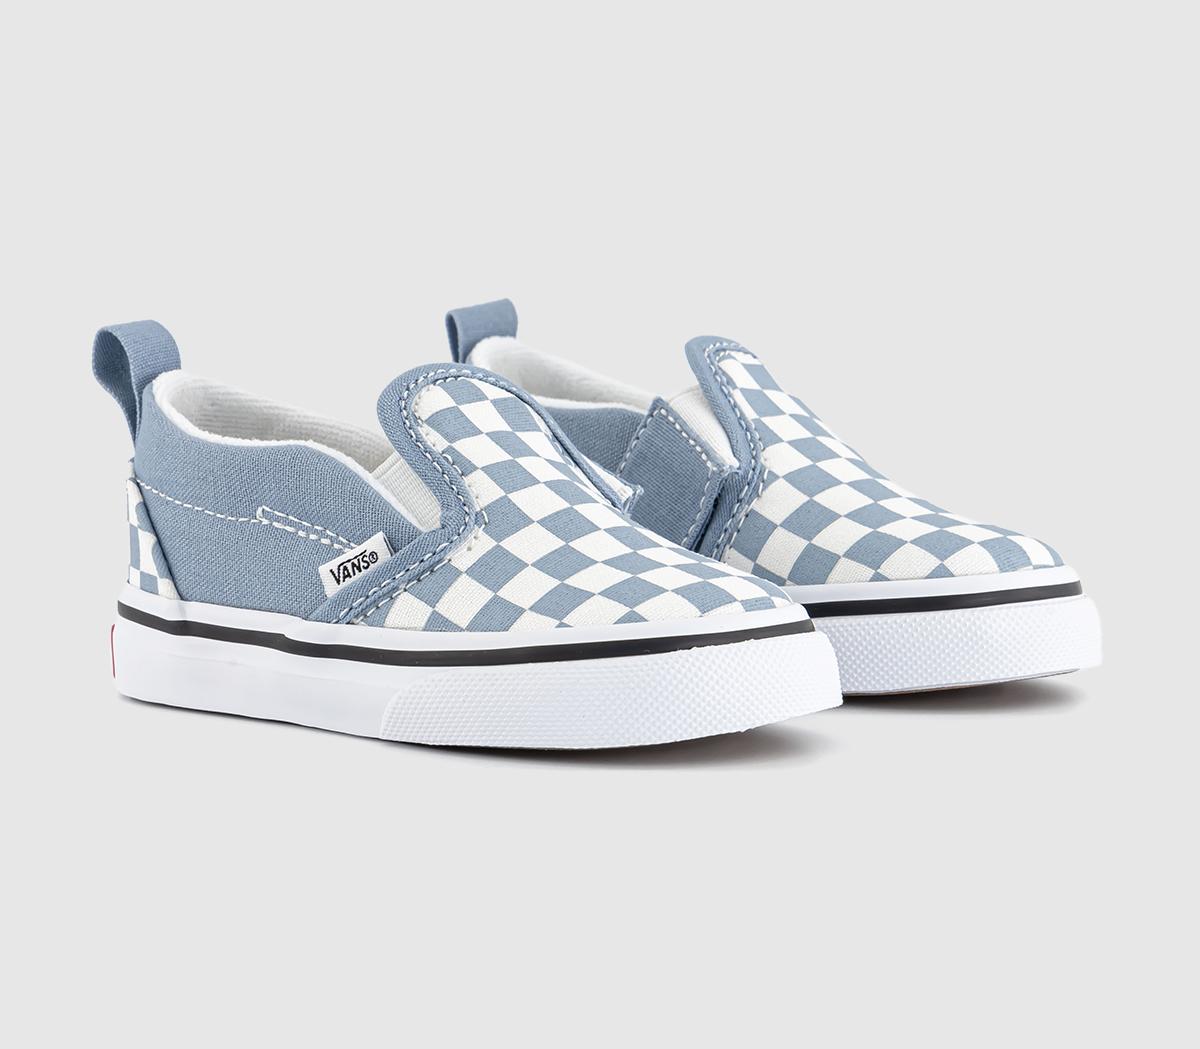 Vans Kids Classic Slip On Toddler Trainers Color Theory Checkerboard Dusty Blue, 8infant